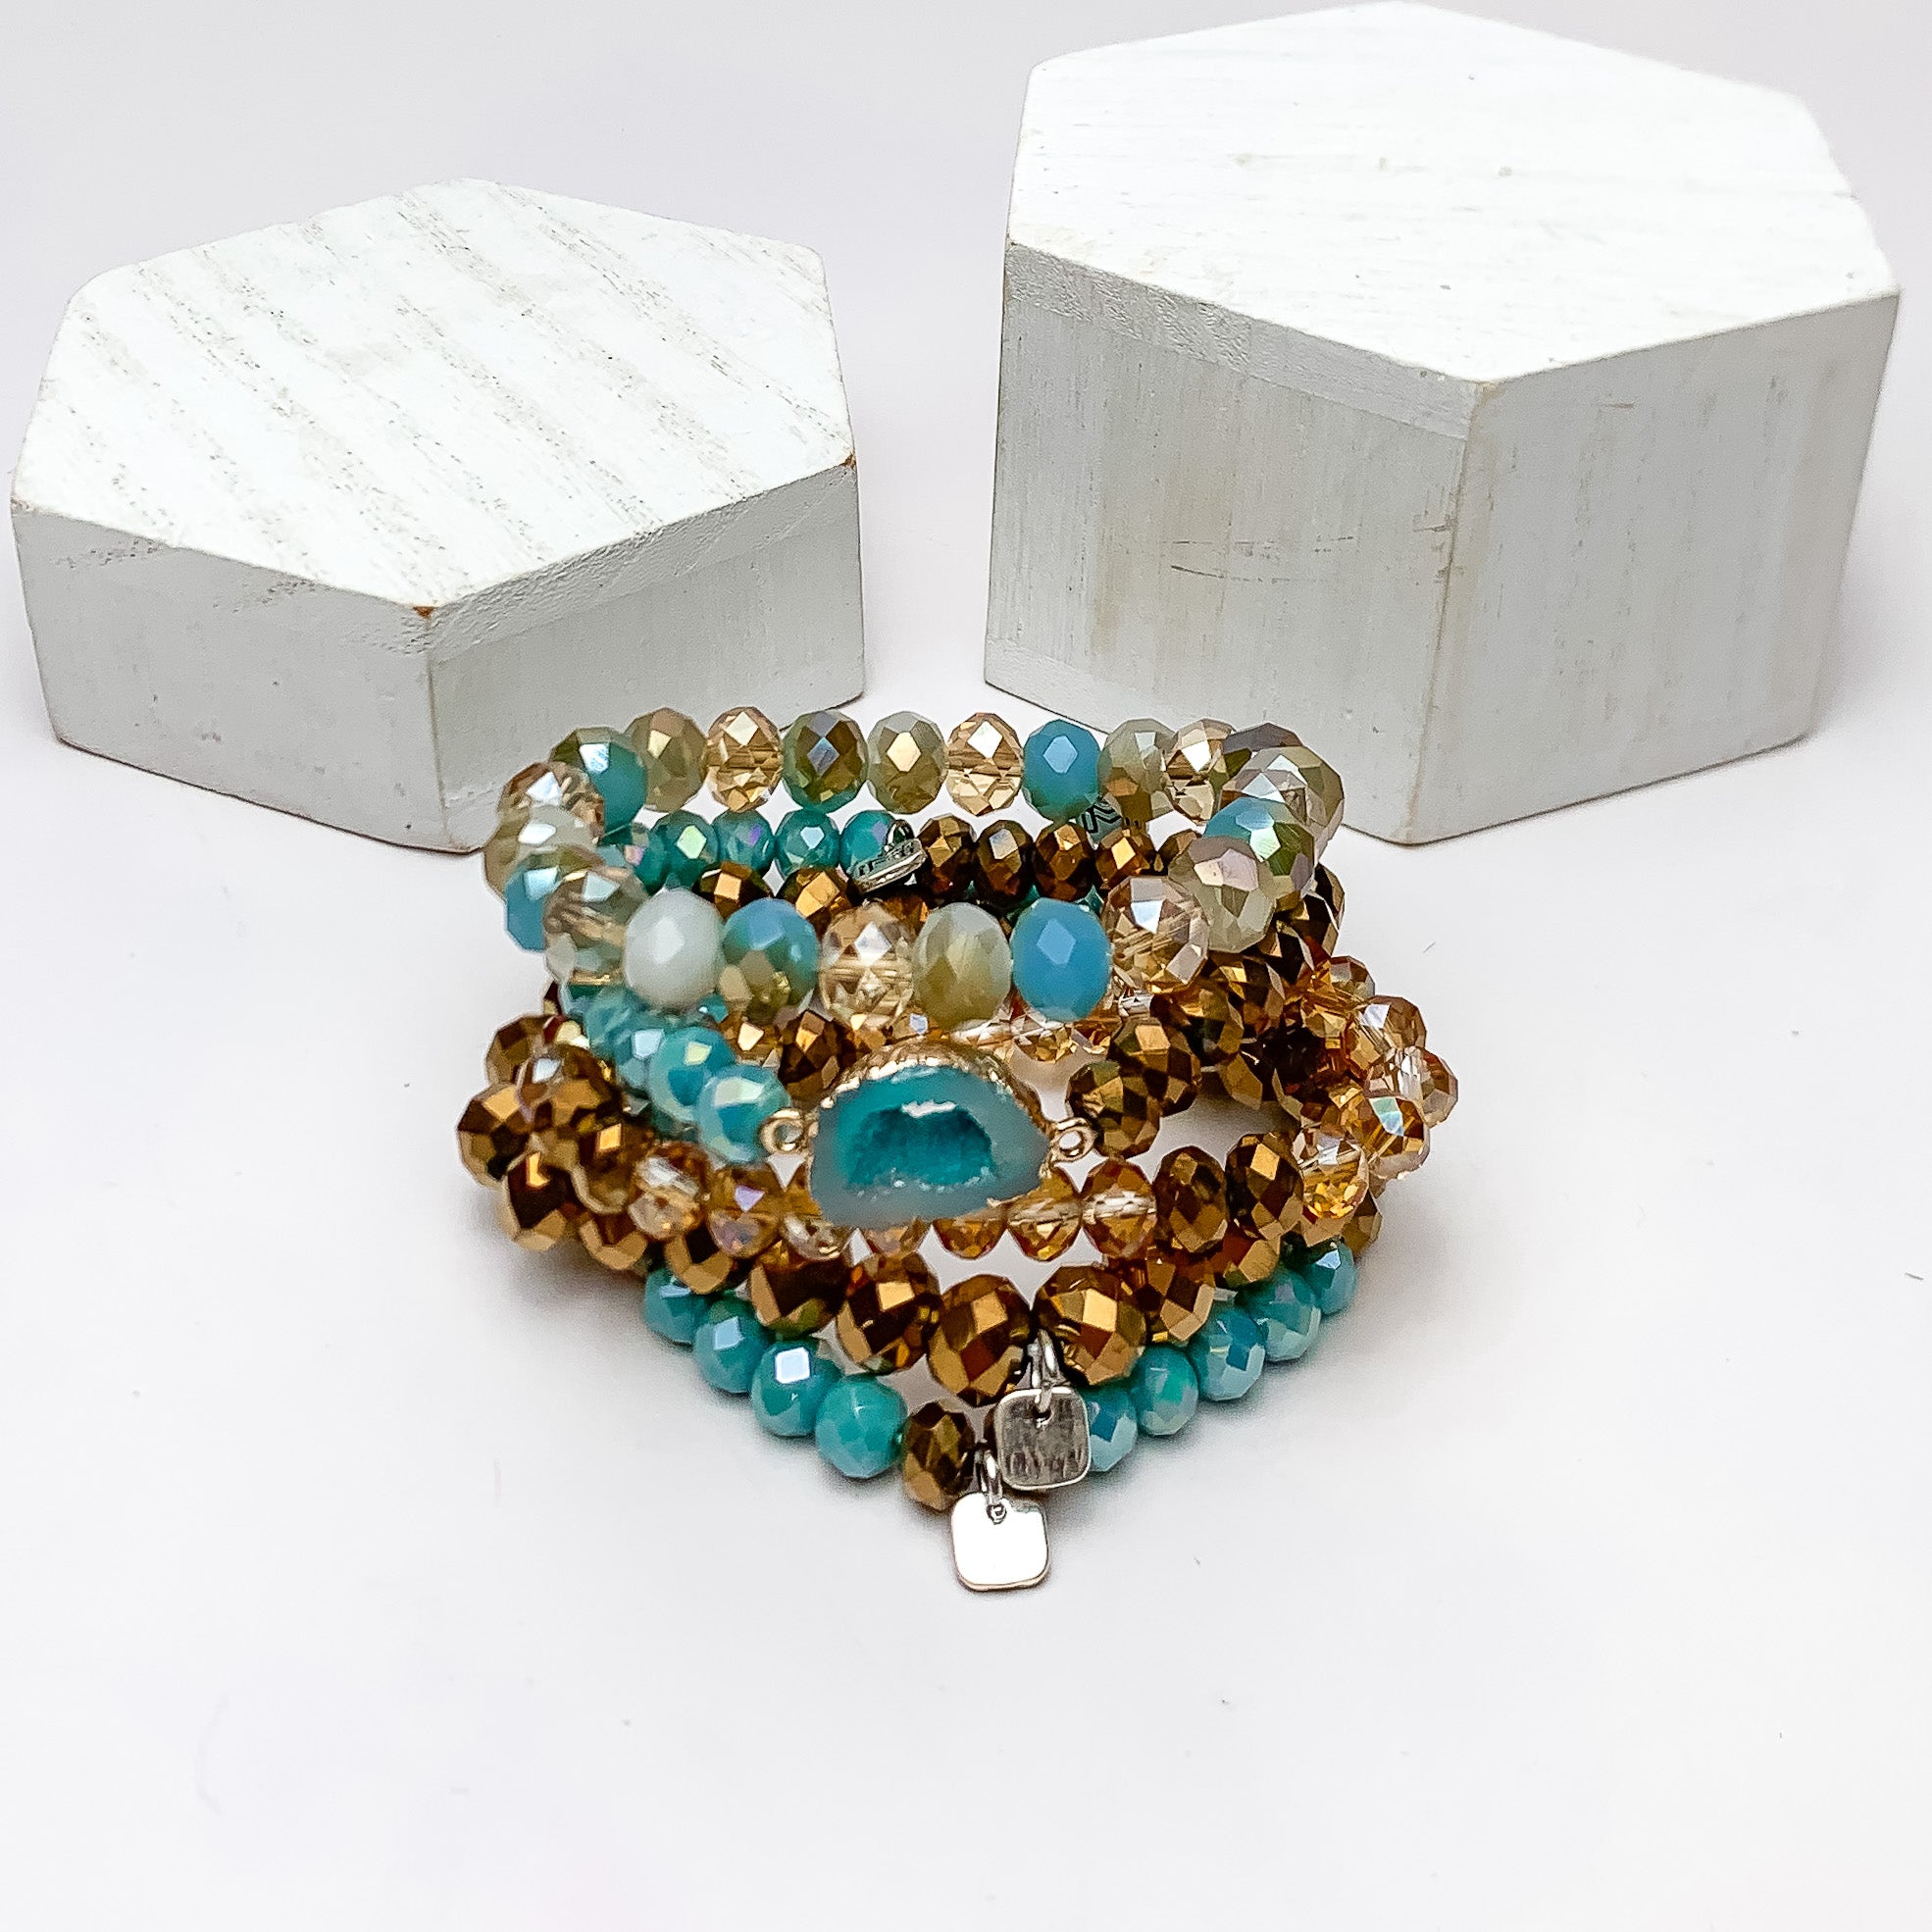 Set of Five | All Nighter Crystal Beaded Bracelet Set in Turquoise Blue and Gold Tones - Giddy Up Glamour Boutique